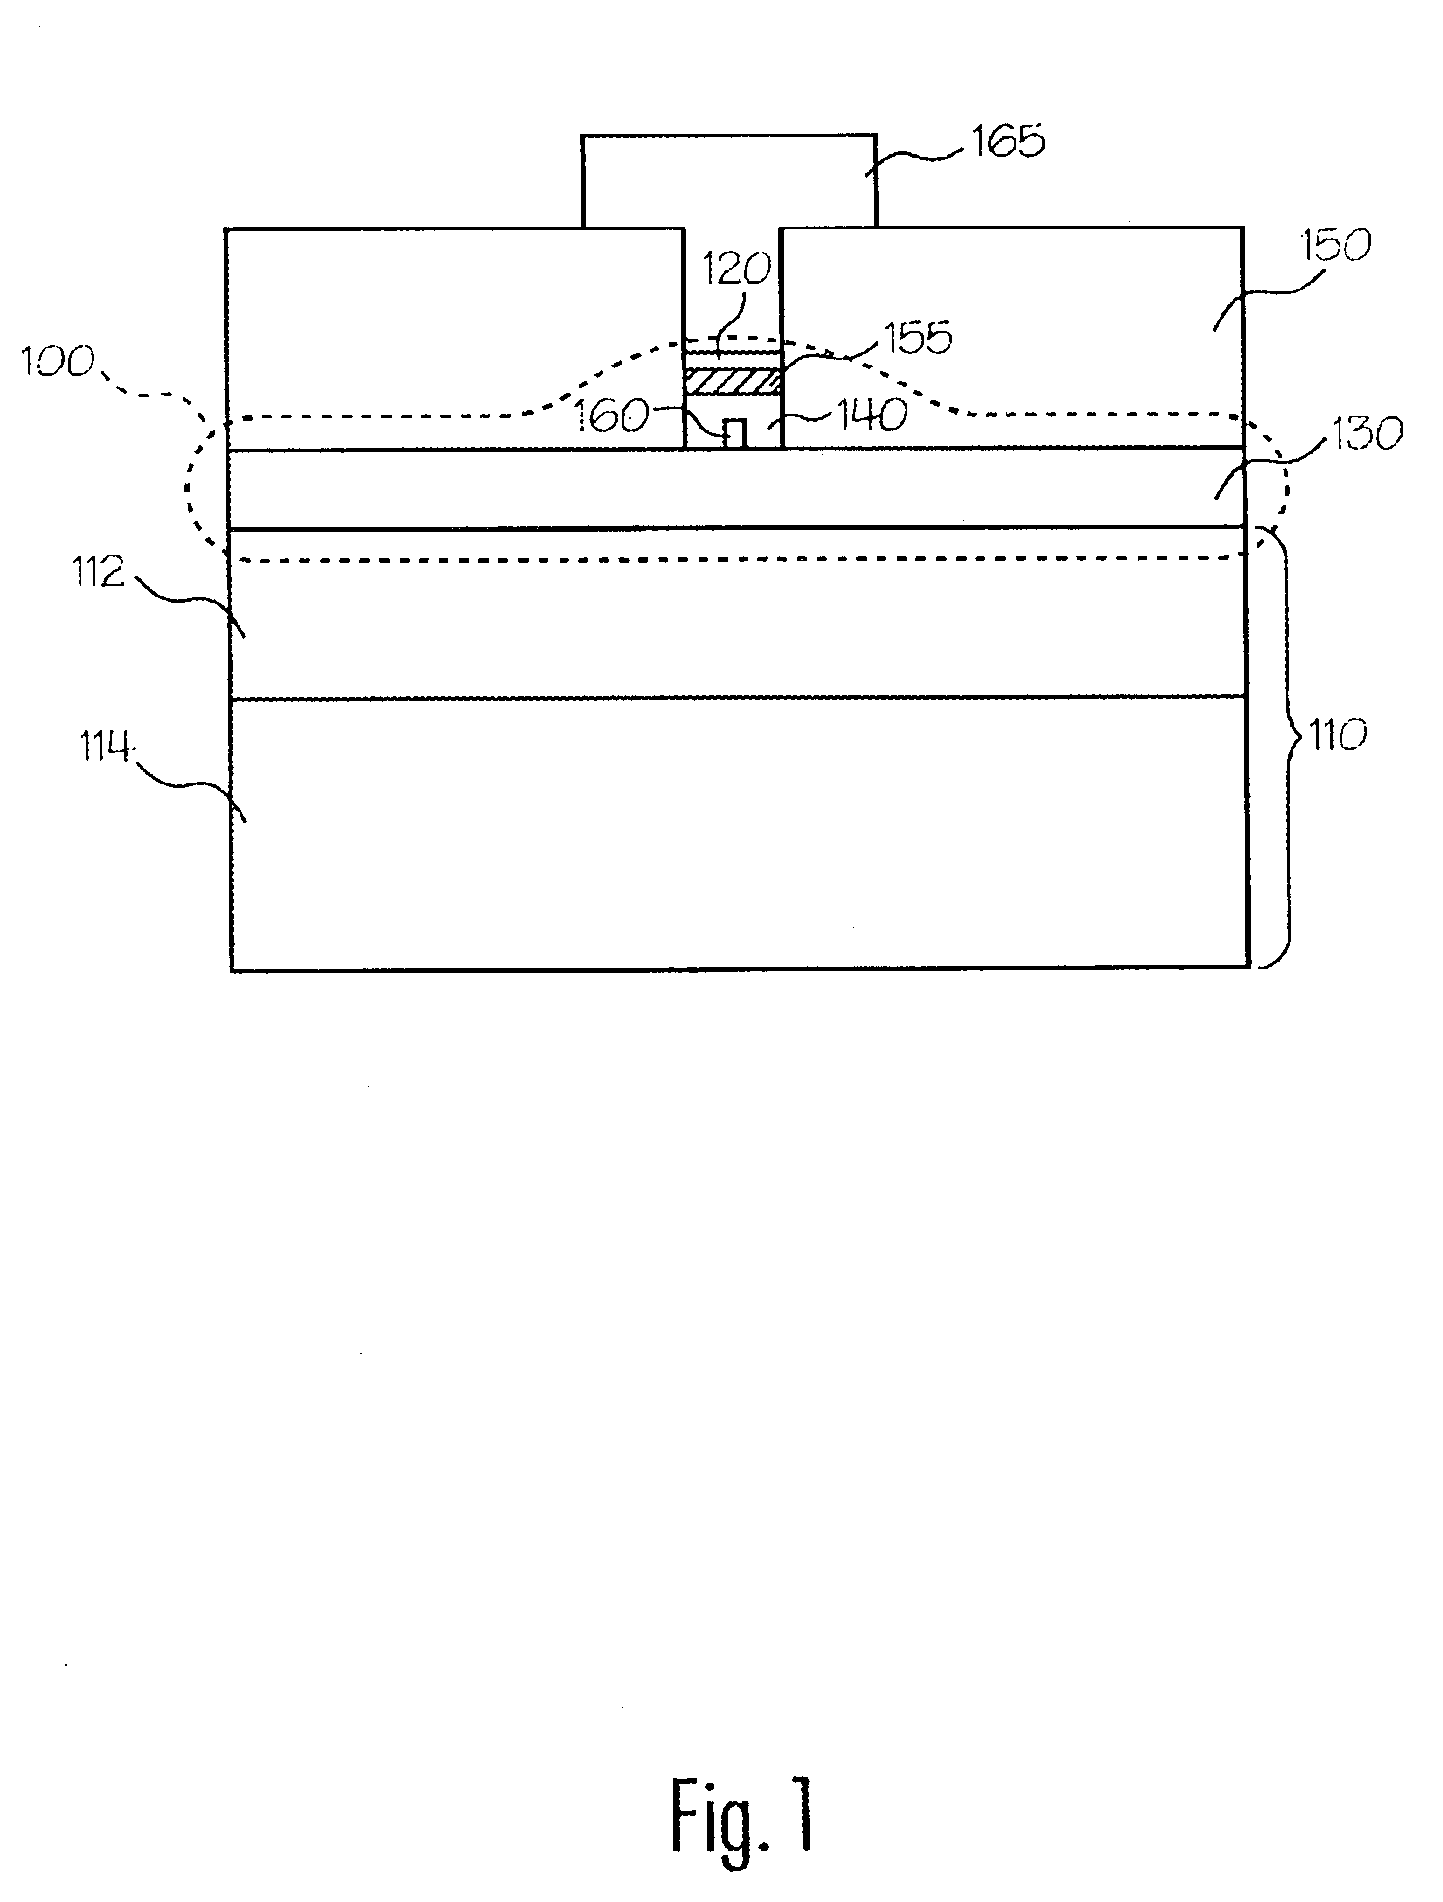 Programmable microelectronic device, structure, and system and method of forming the same